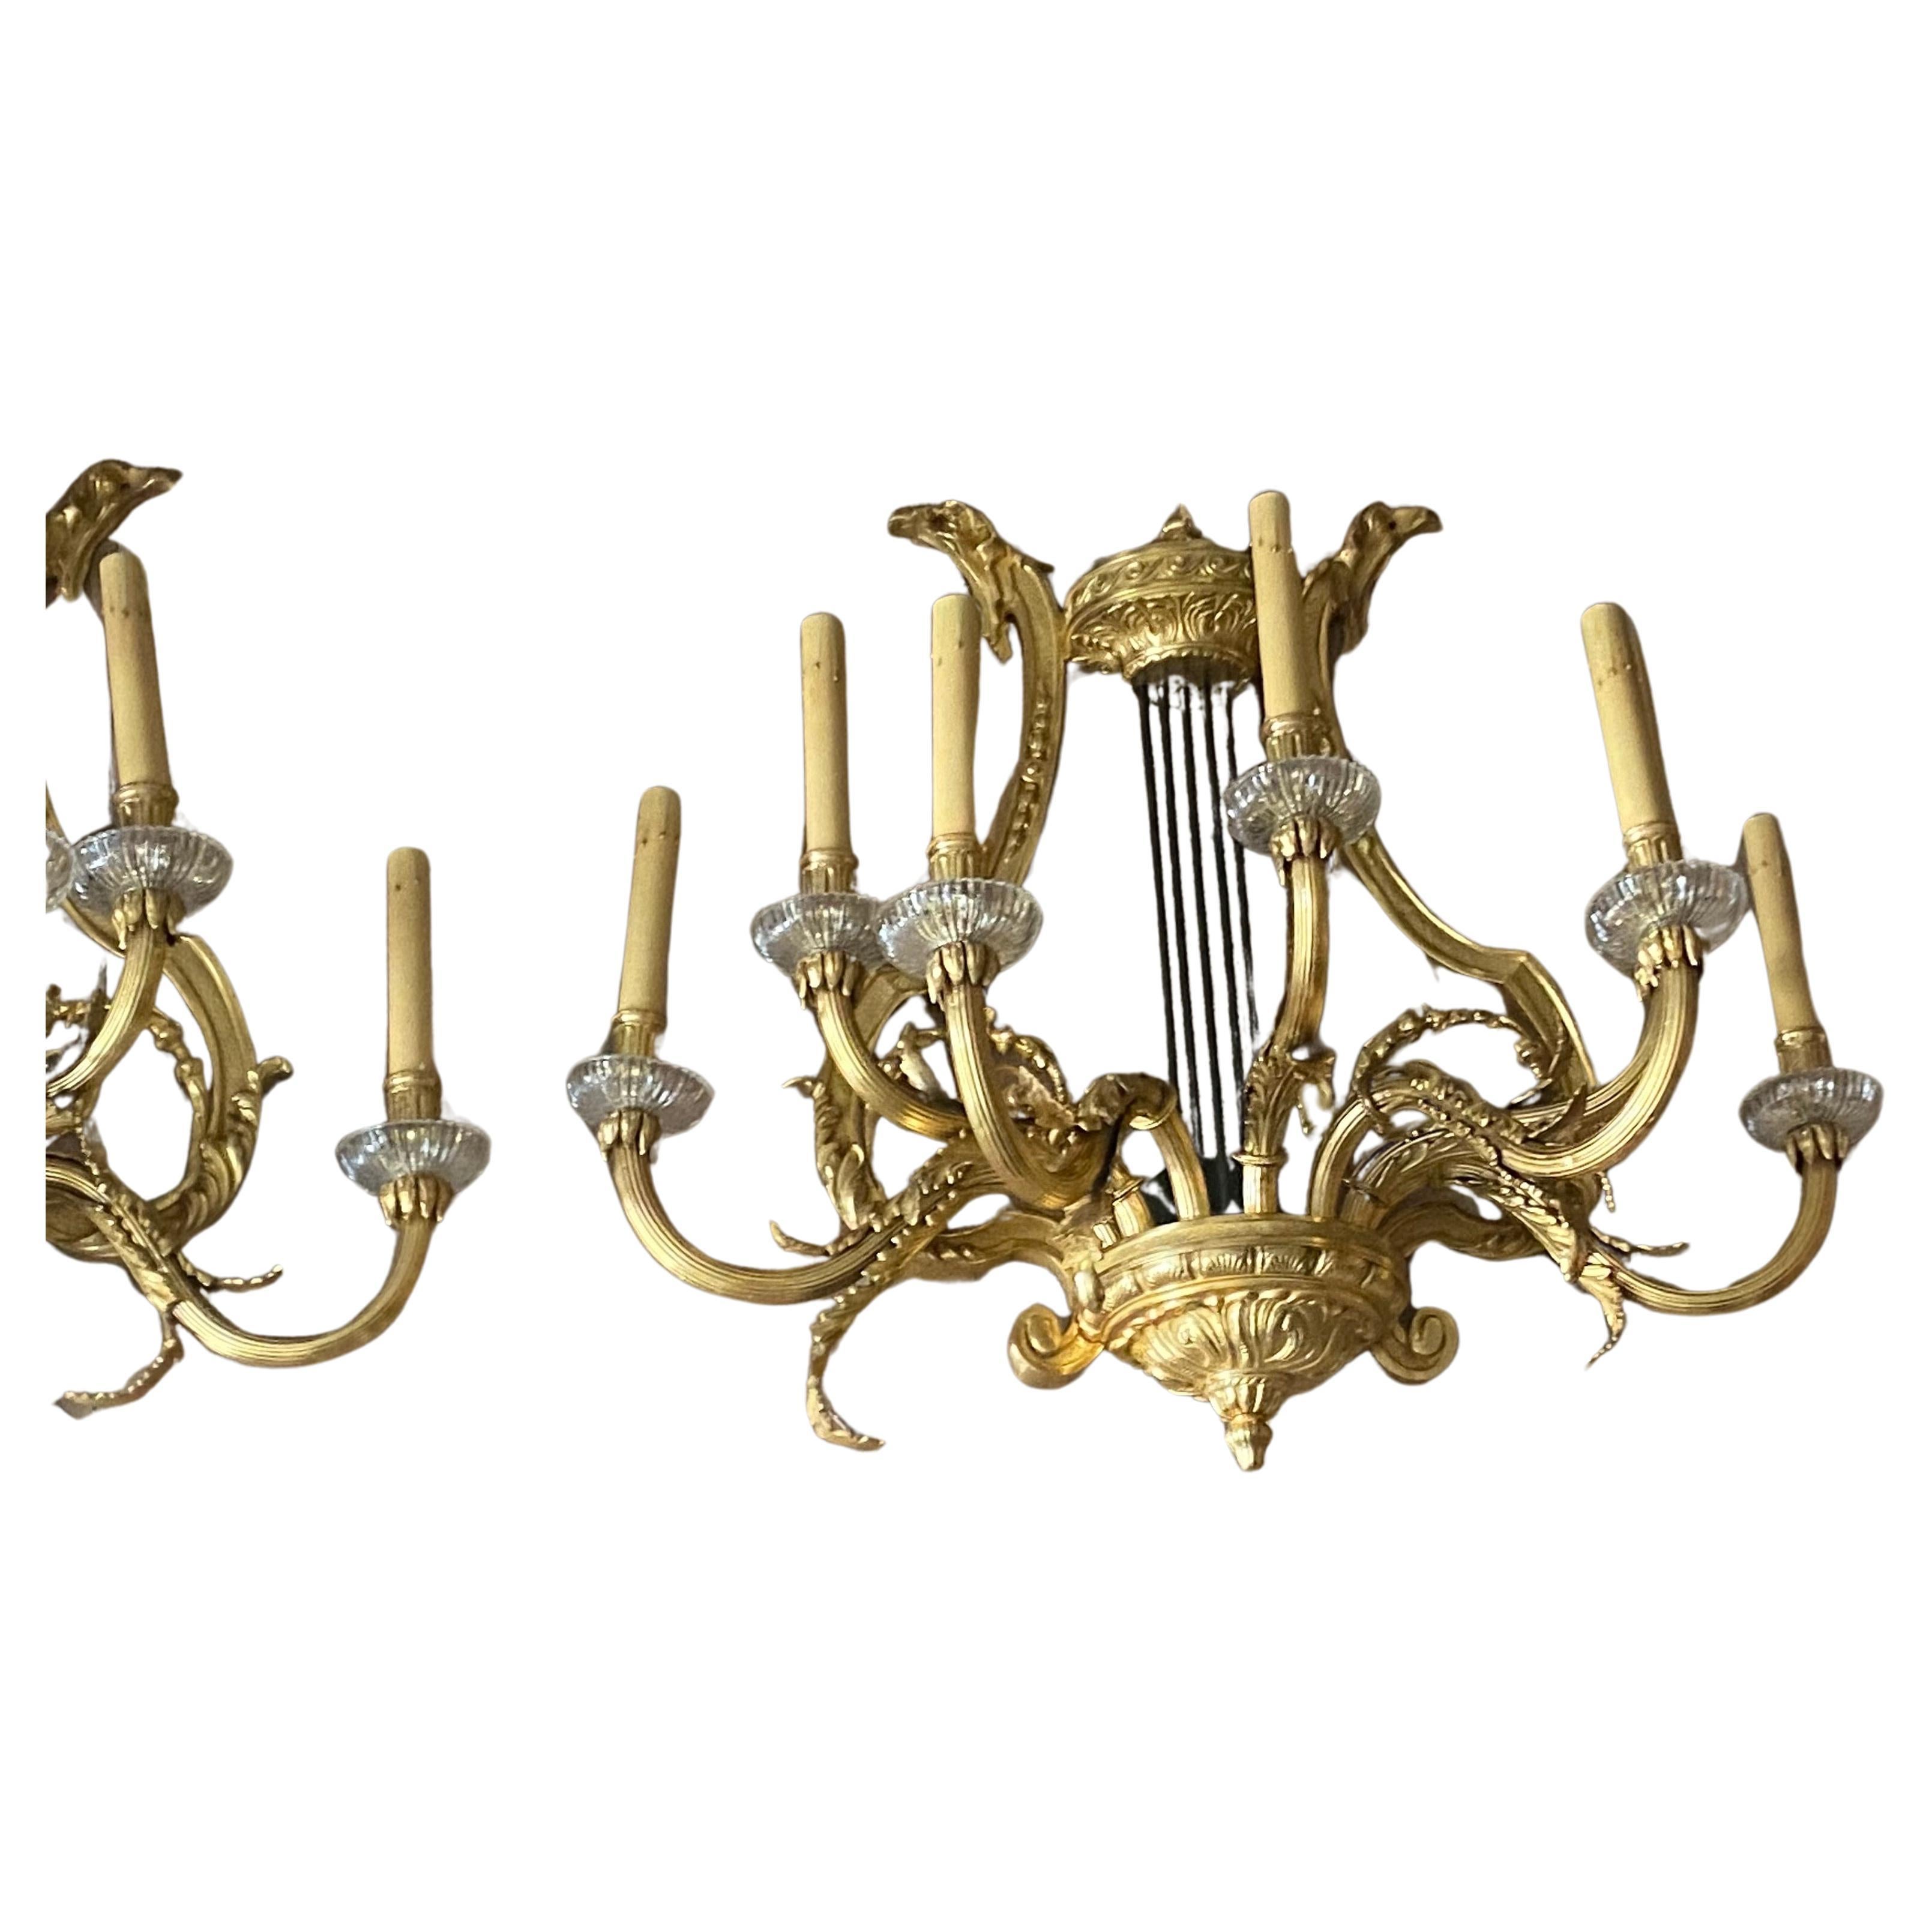 Huge Pair of 19th Century French Gilt Bronze Dore Wall Sconces For Sale 8